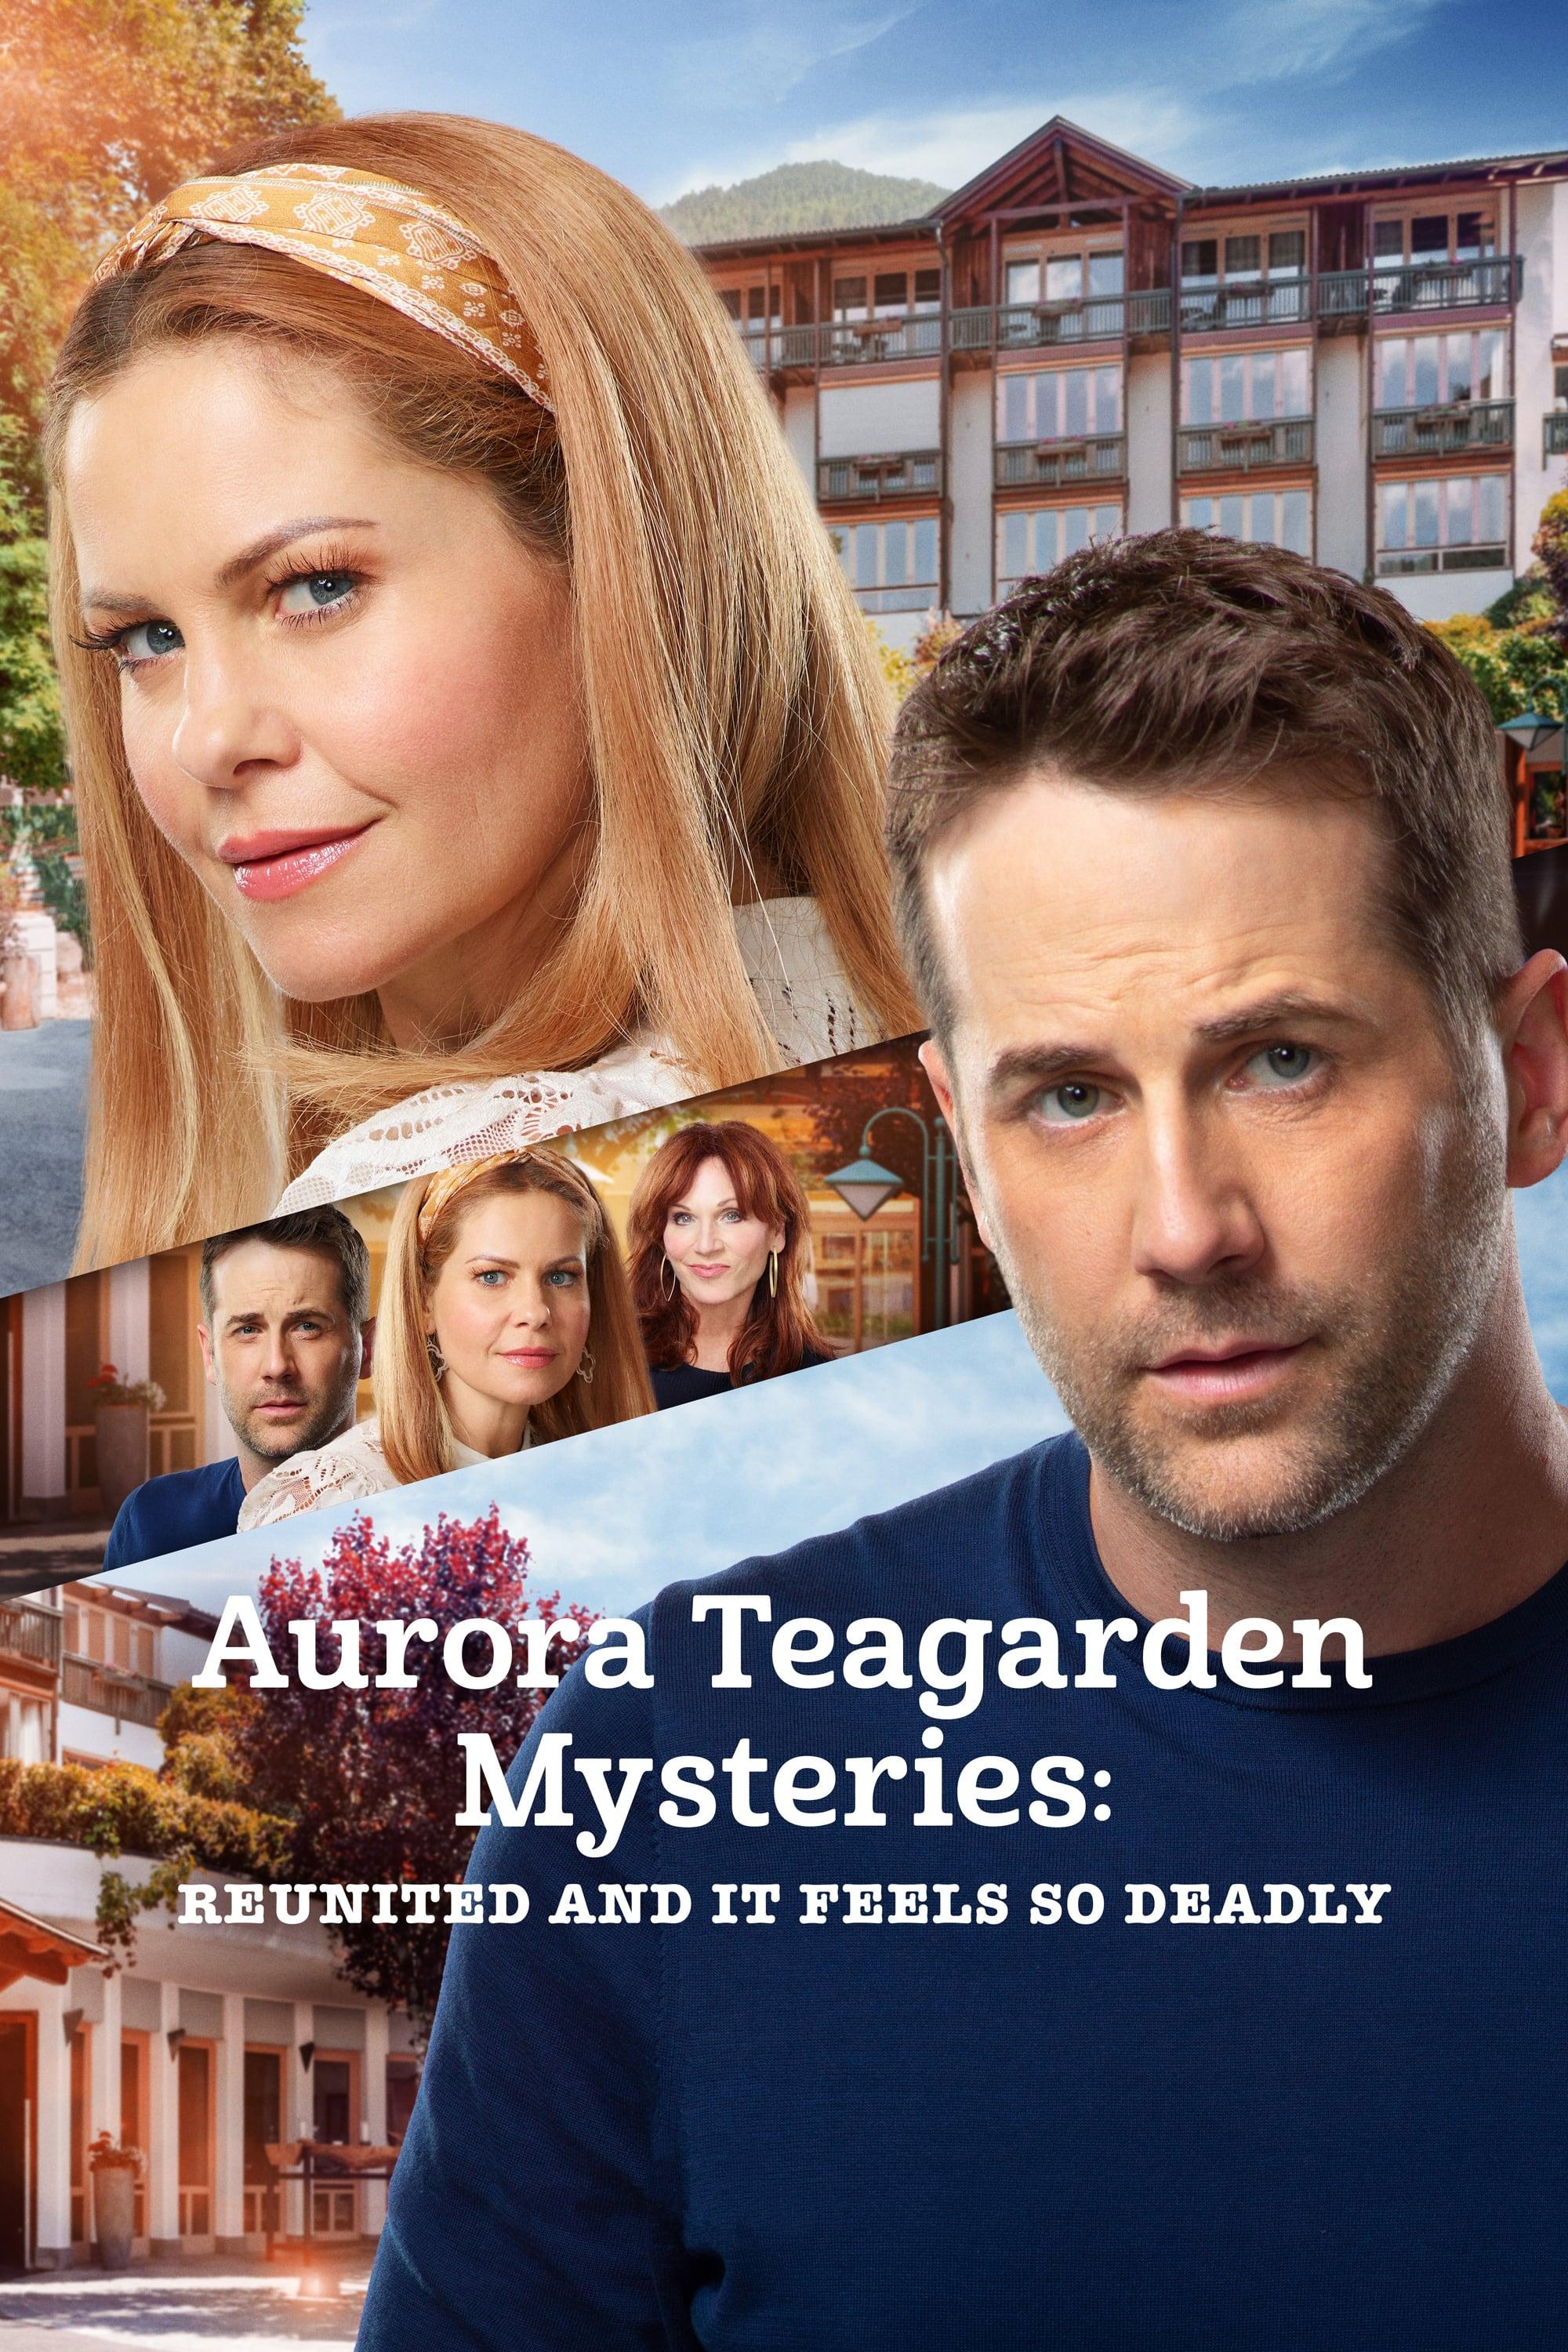 Aurora Teagarden Mysteries: Reunited and It Feels So Deadly poster